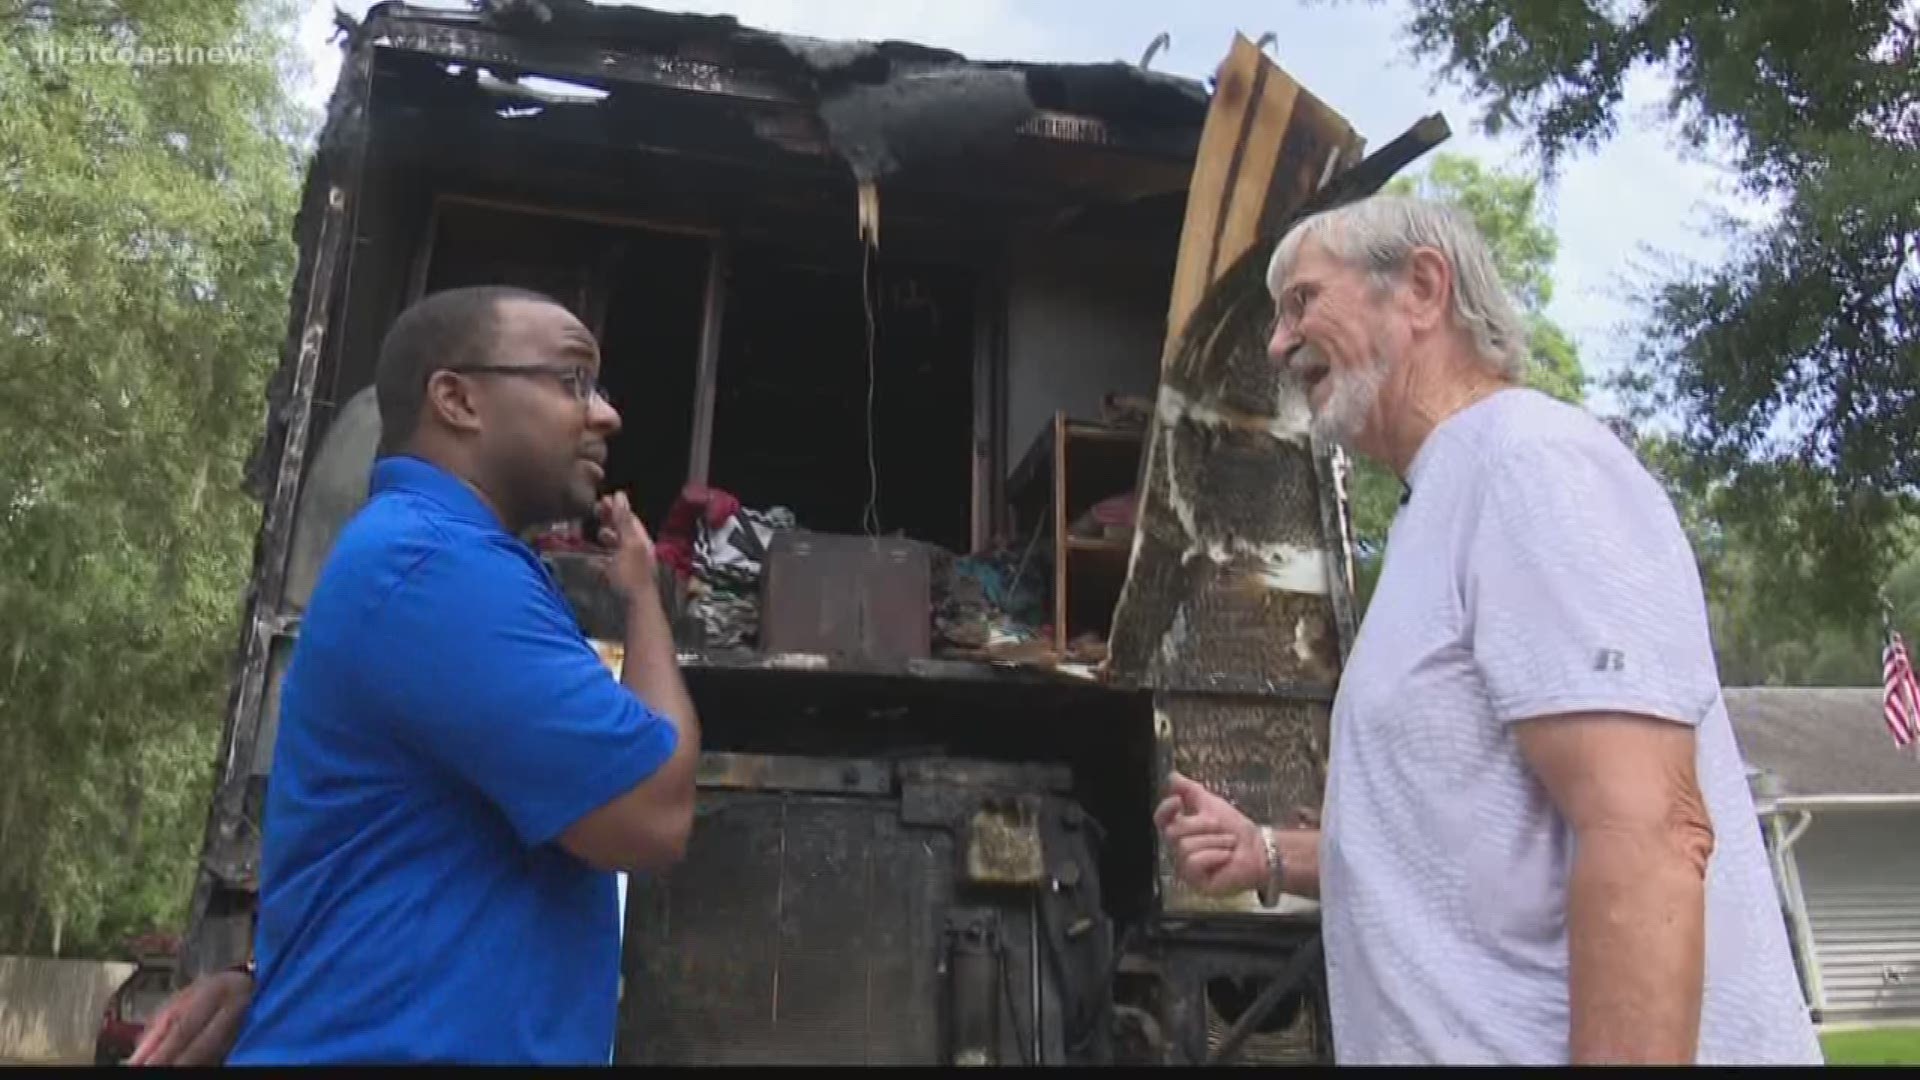 Bill Hancock and his wife are counting their blessings after their RV caught fire Monday afternoon in Arlington.